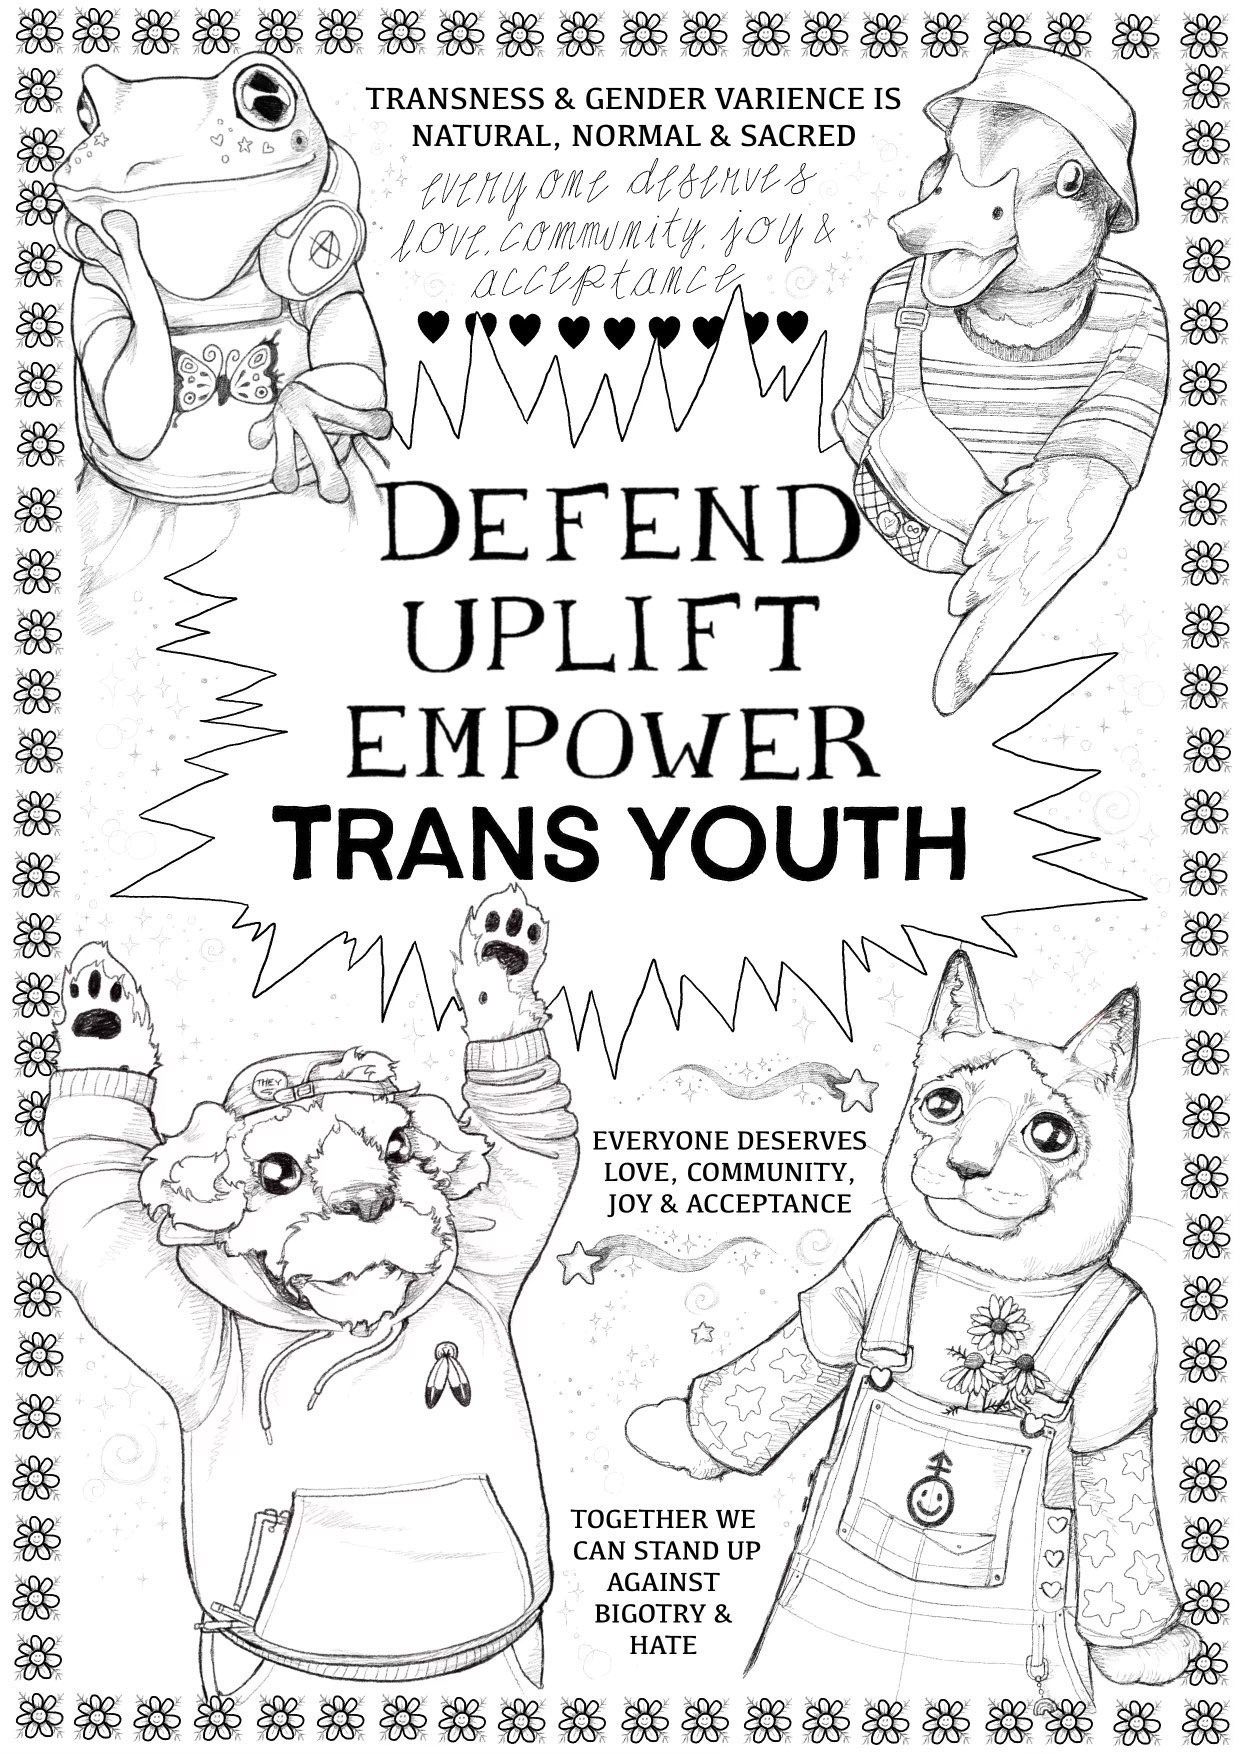 A poster featuring young anthropomorphic animals – a frog, a duck, a dog, and a cat – wearing kids clothes, headphones, overalls, hoodies. A border of flowers frames them, and the text reads: “Transness and Gender Variance is Natural, Normal, and Sacred. Everyone deserves love, community, joy, and acceptance. Defend, uplift, empower trans youth. Together we can stand up against bigotry and hate.”